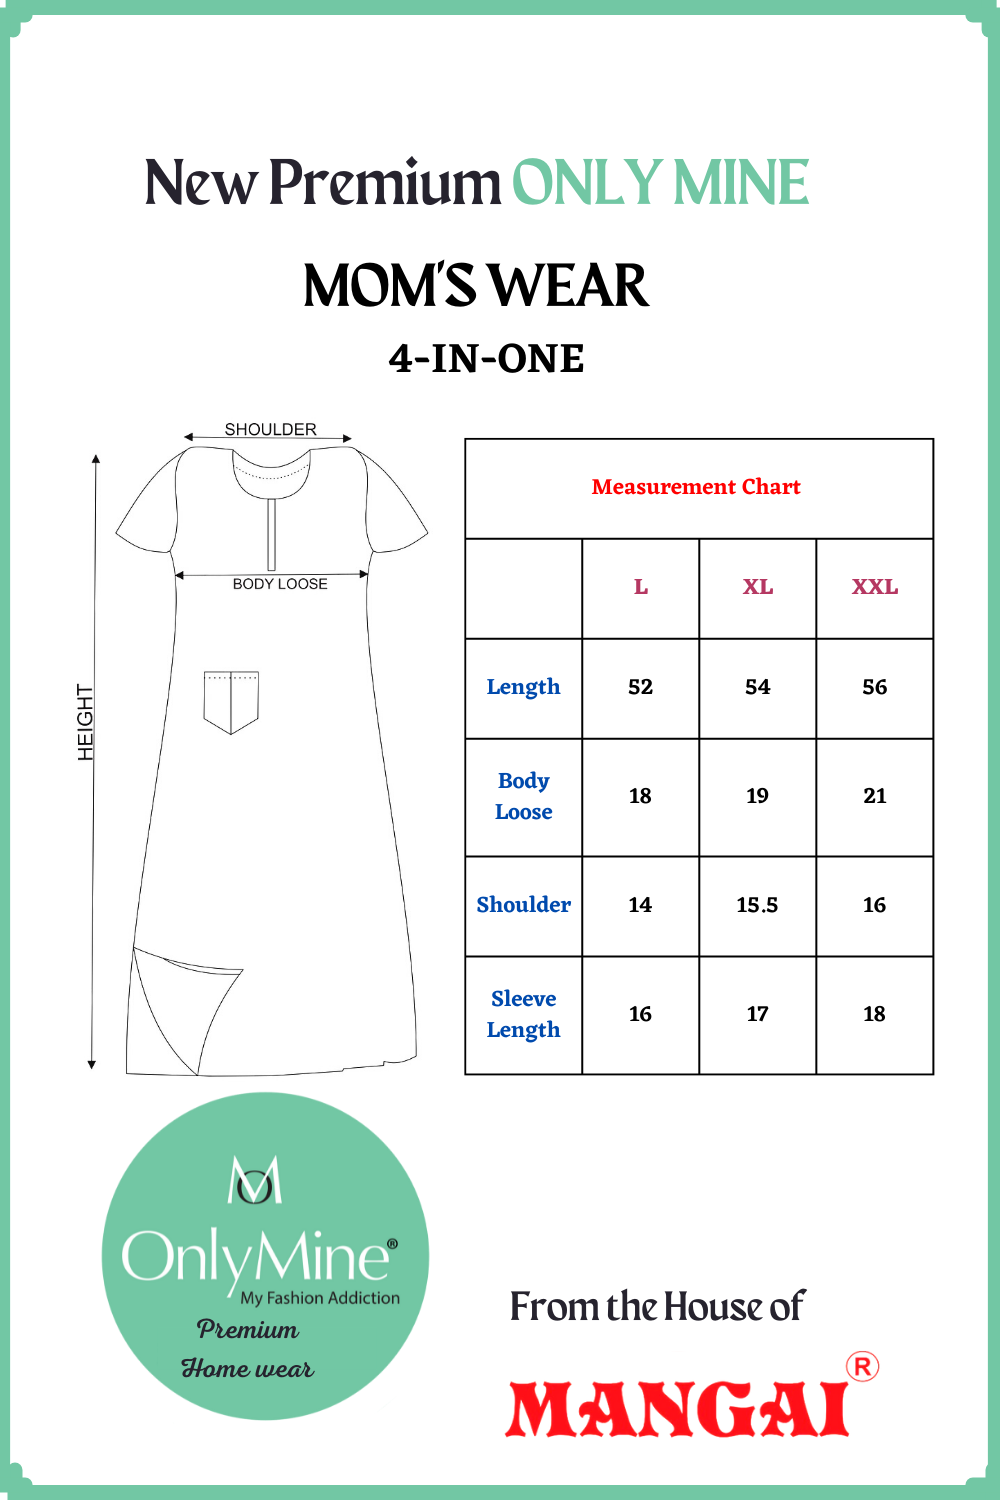 ONLY MINE New Arrival Premium 4-IN-ONE Mom's Wear - Soft & Smooth Rayon | Maternity | Feeding | Long Frock | Casual Wear for Pregnancy Women's